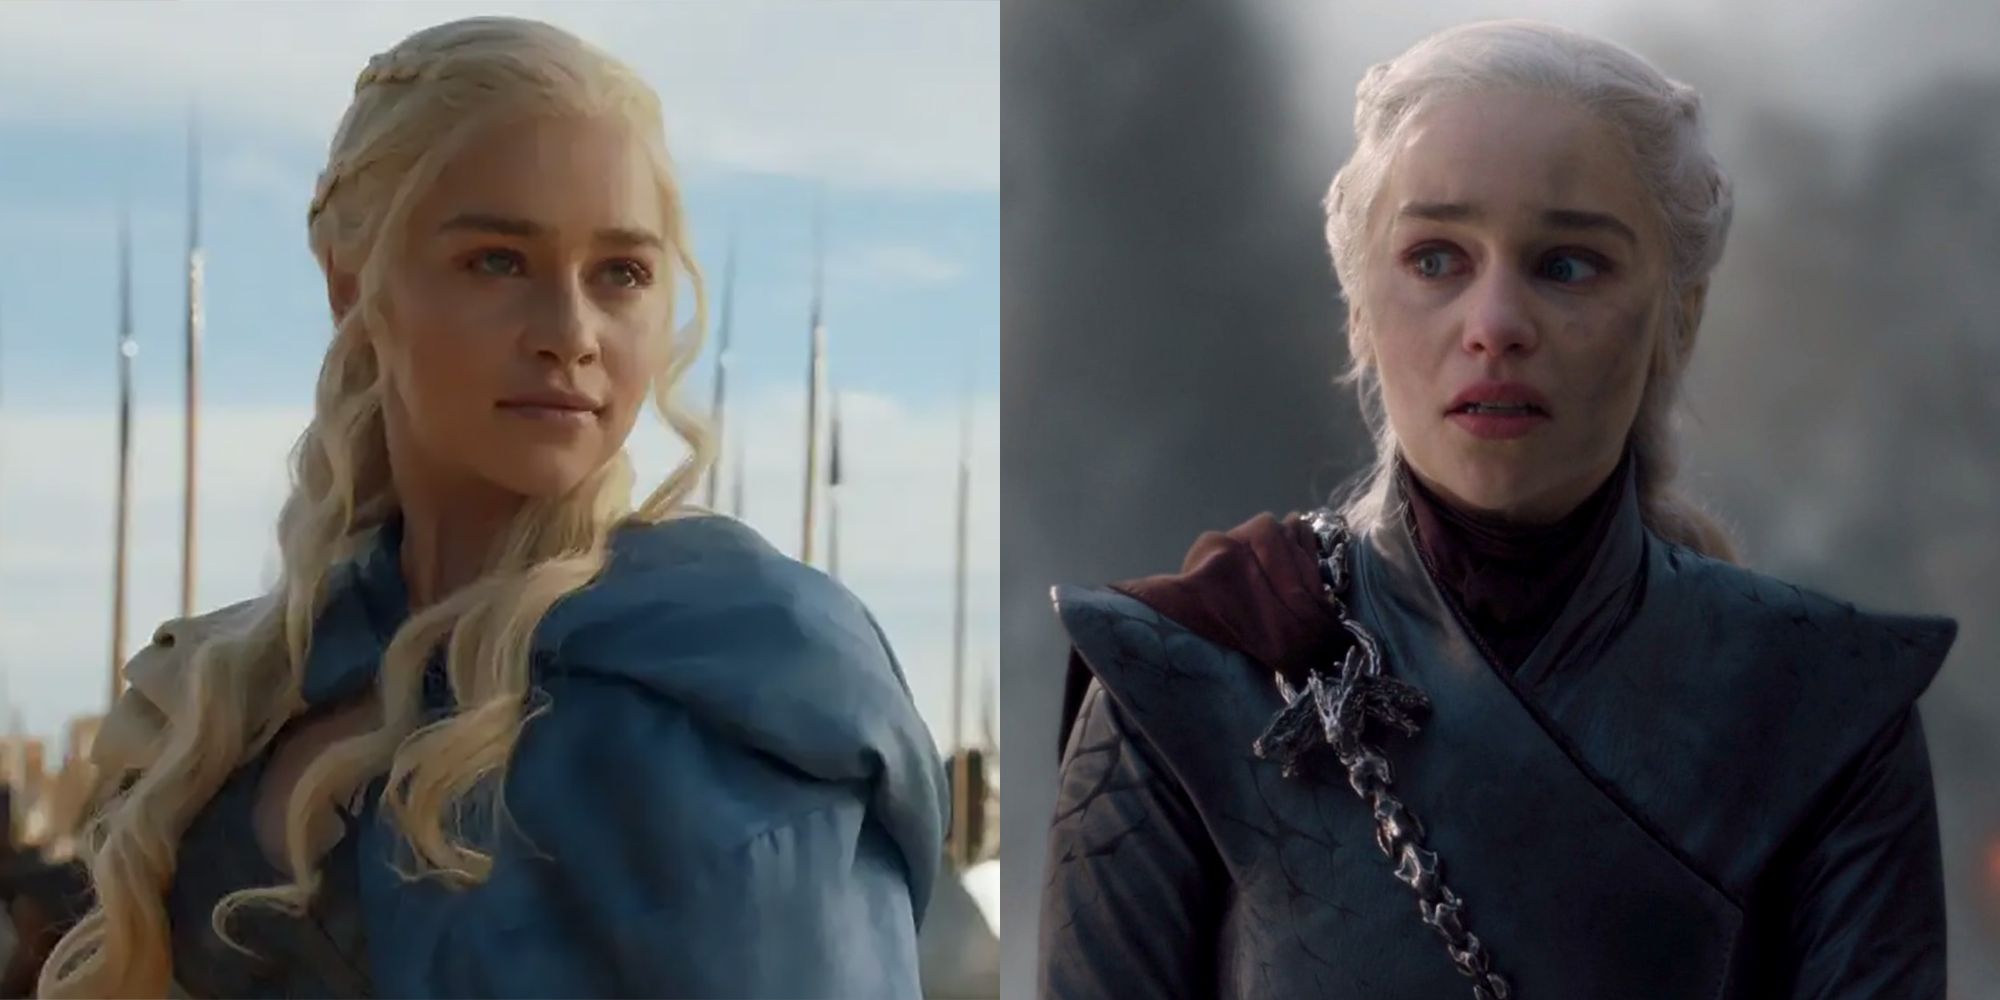 78 'Game of Thrones' Quotes from Jon Snow, Daenerys Targaryen and Tyrion  Lannister - Parade